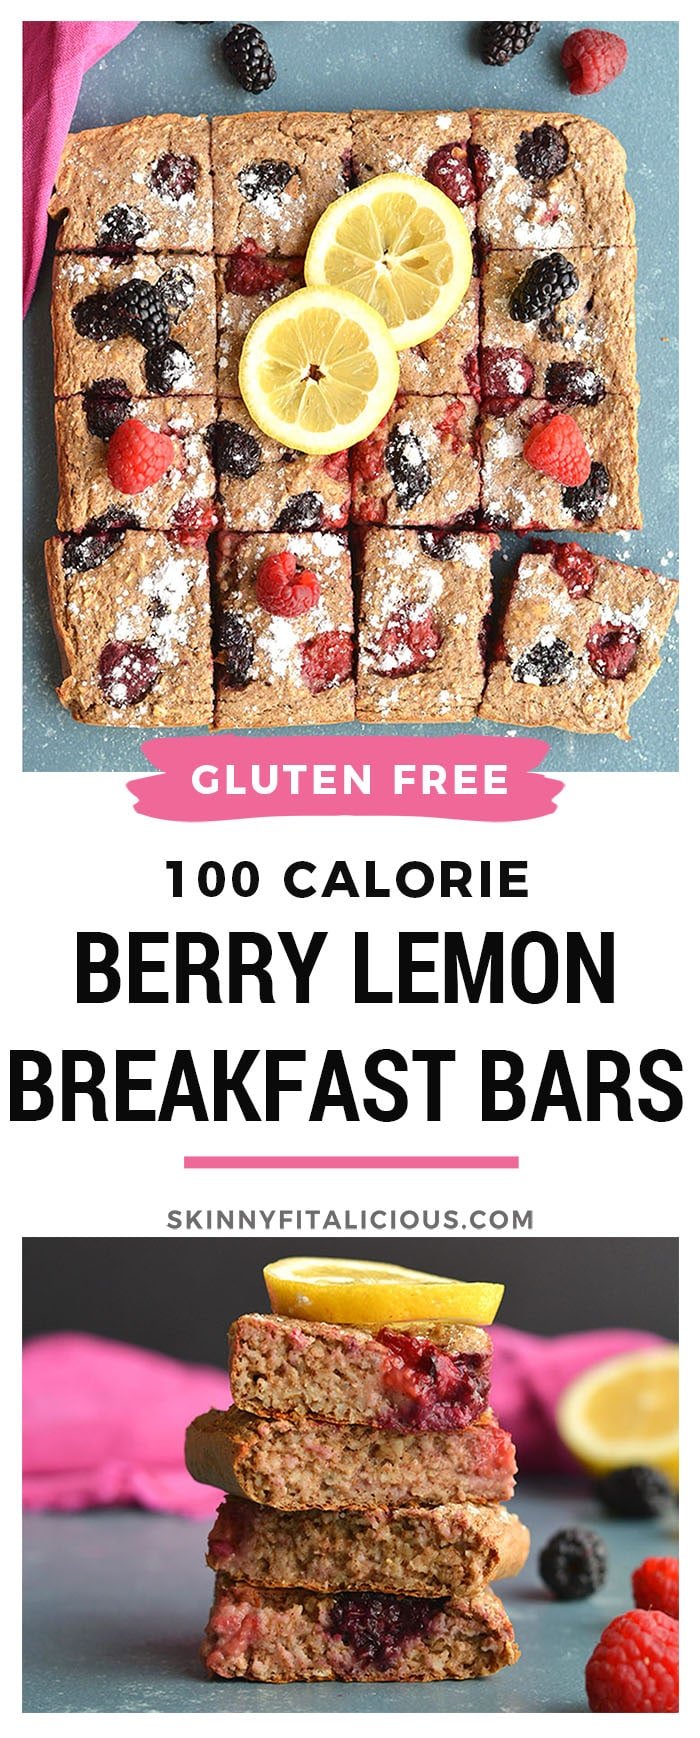 100 Calorie Berry Lemon Breakfast Bars! Super easy baked breakfast bars filled with sneaky healthy ingredients. Balanced in carbs, protein and healthy fat, these bars are a favorite breakfast meal prep recipe and only 100 calories! Gluten Free + Low Calorie